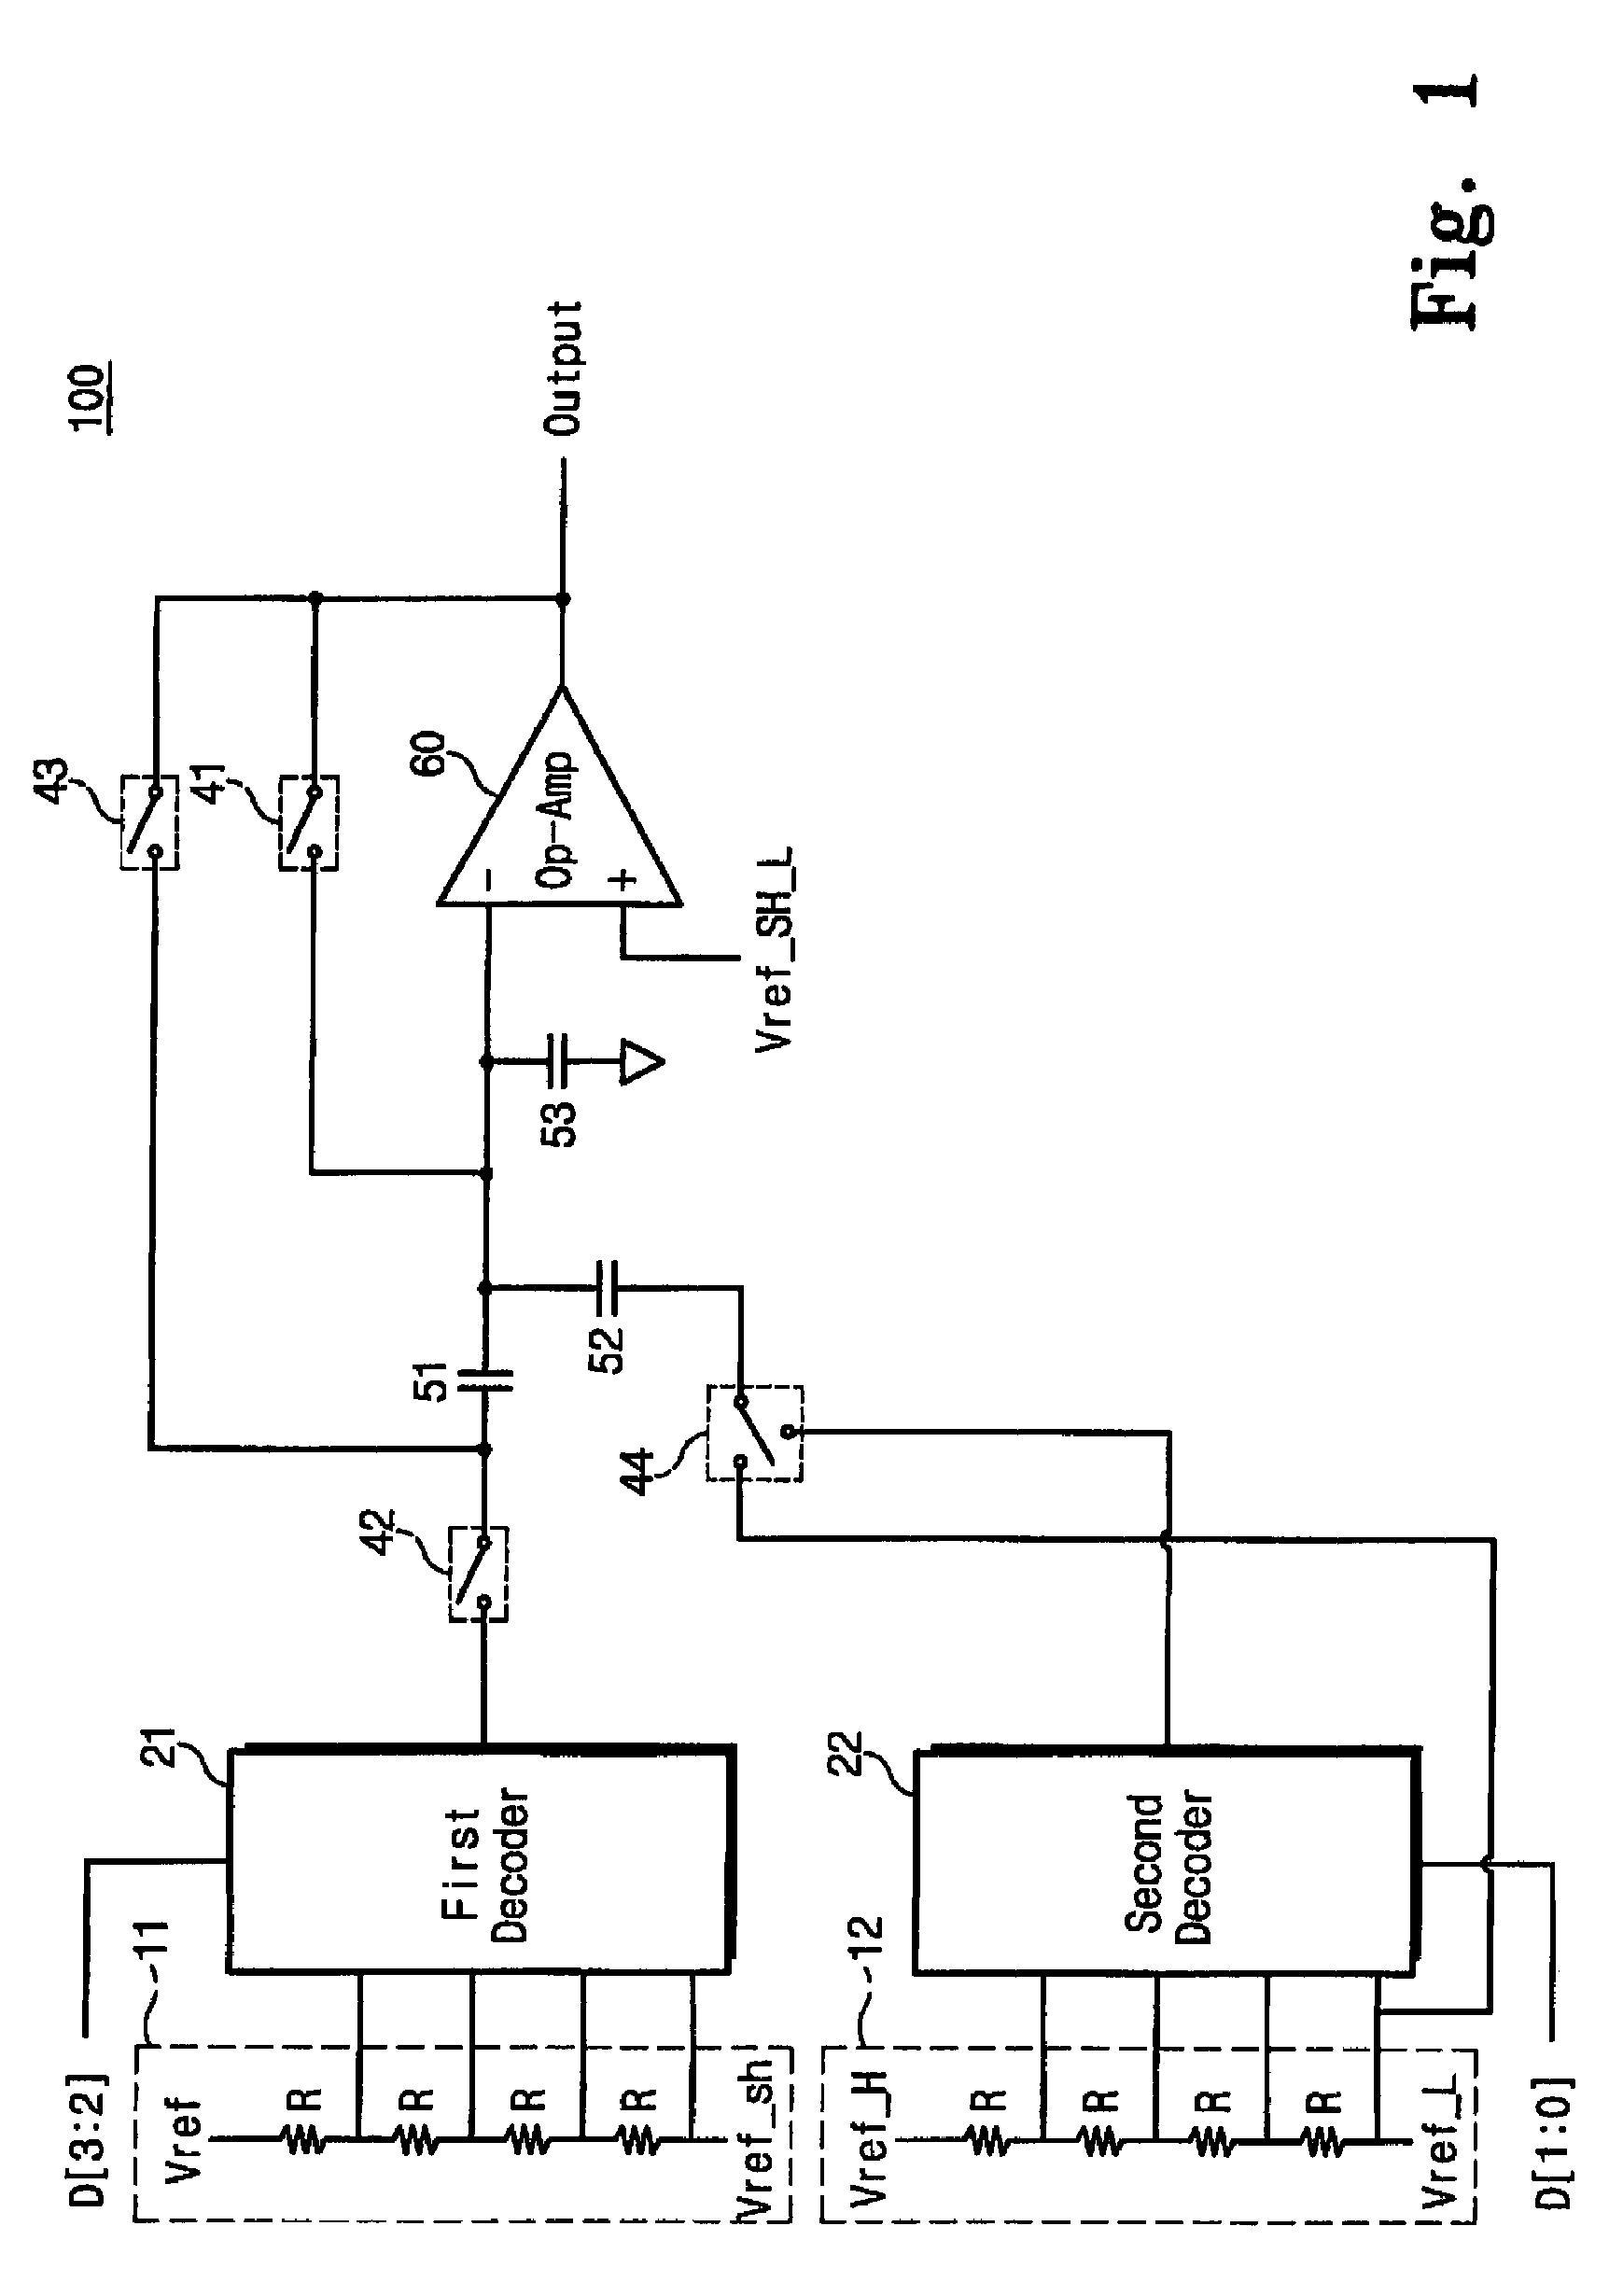 Digital to analog converter and source driver